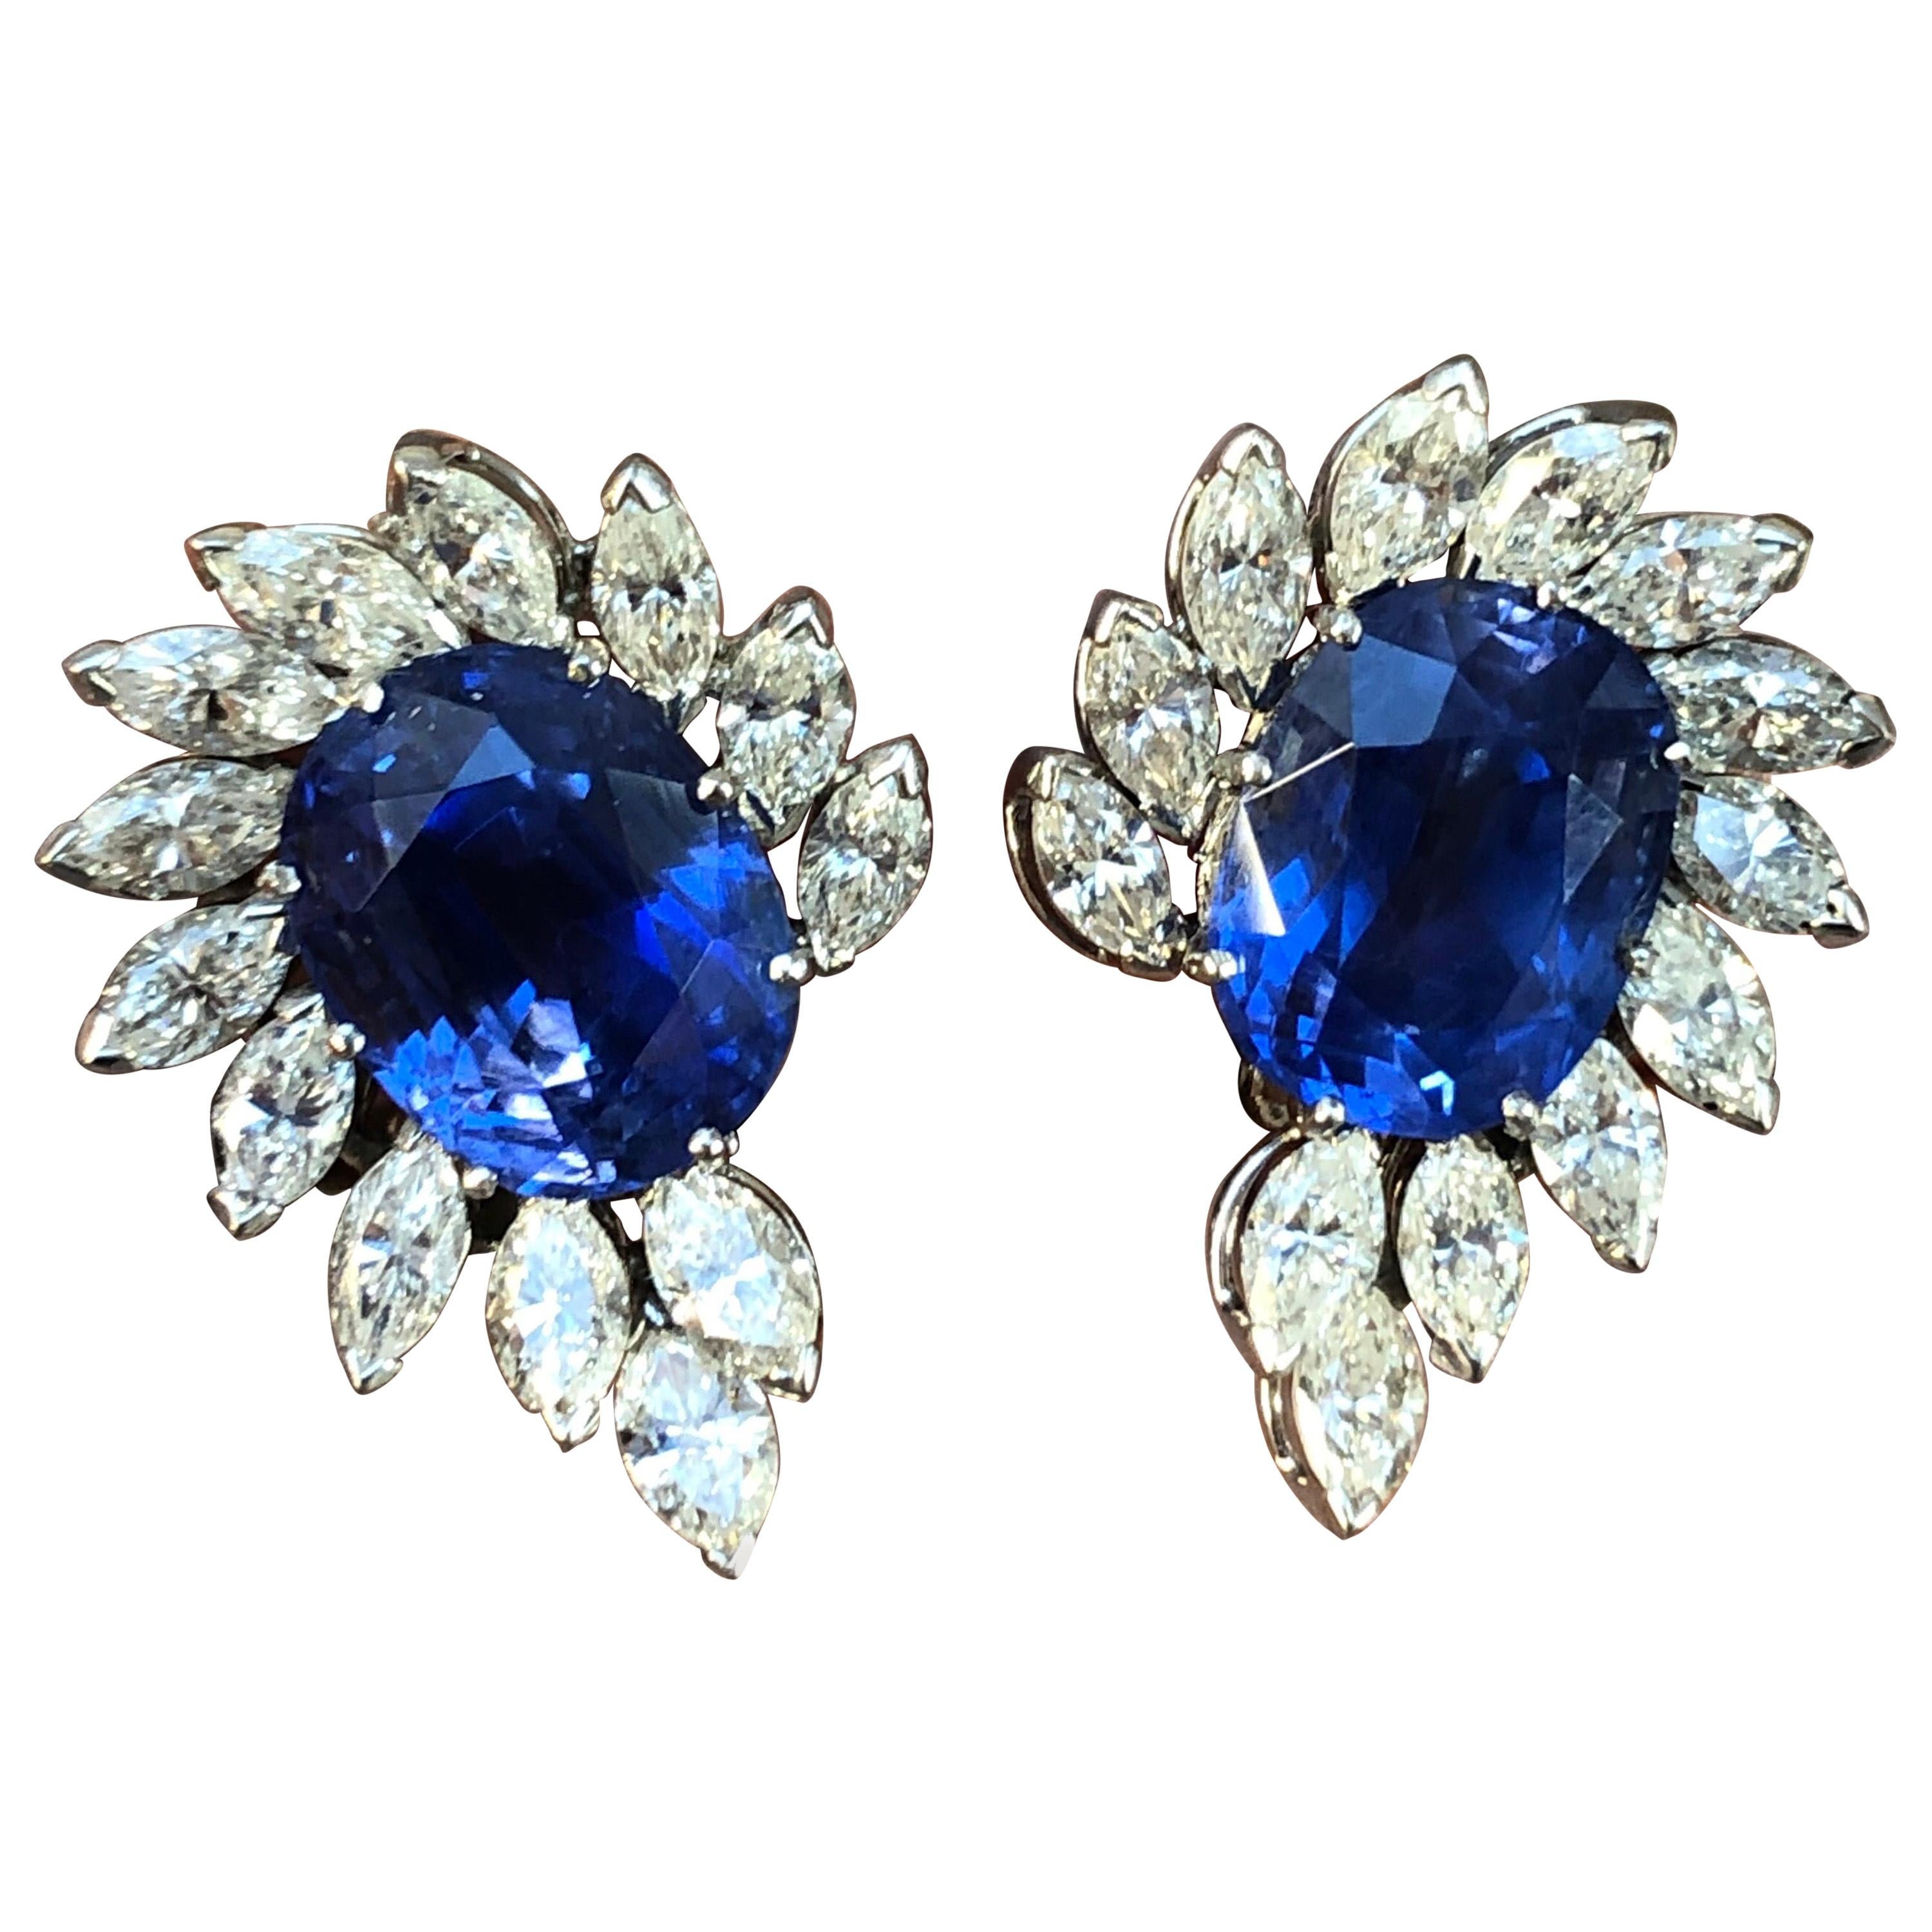 Pair of Sapphire and Diamond Earrings SSEF 14.92 Carat Untreated Sapphires For Sale